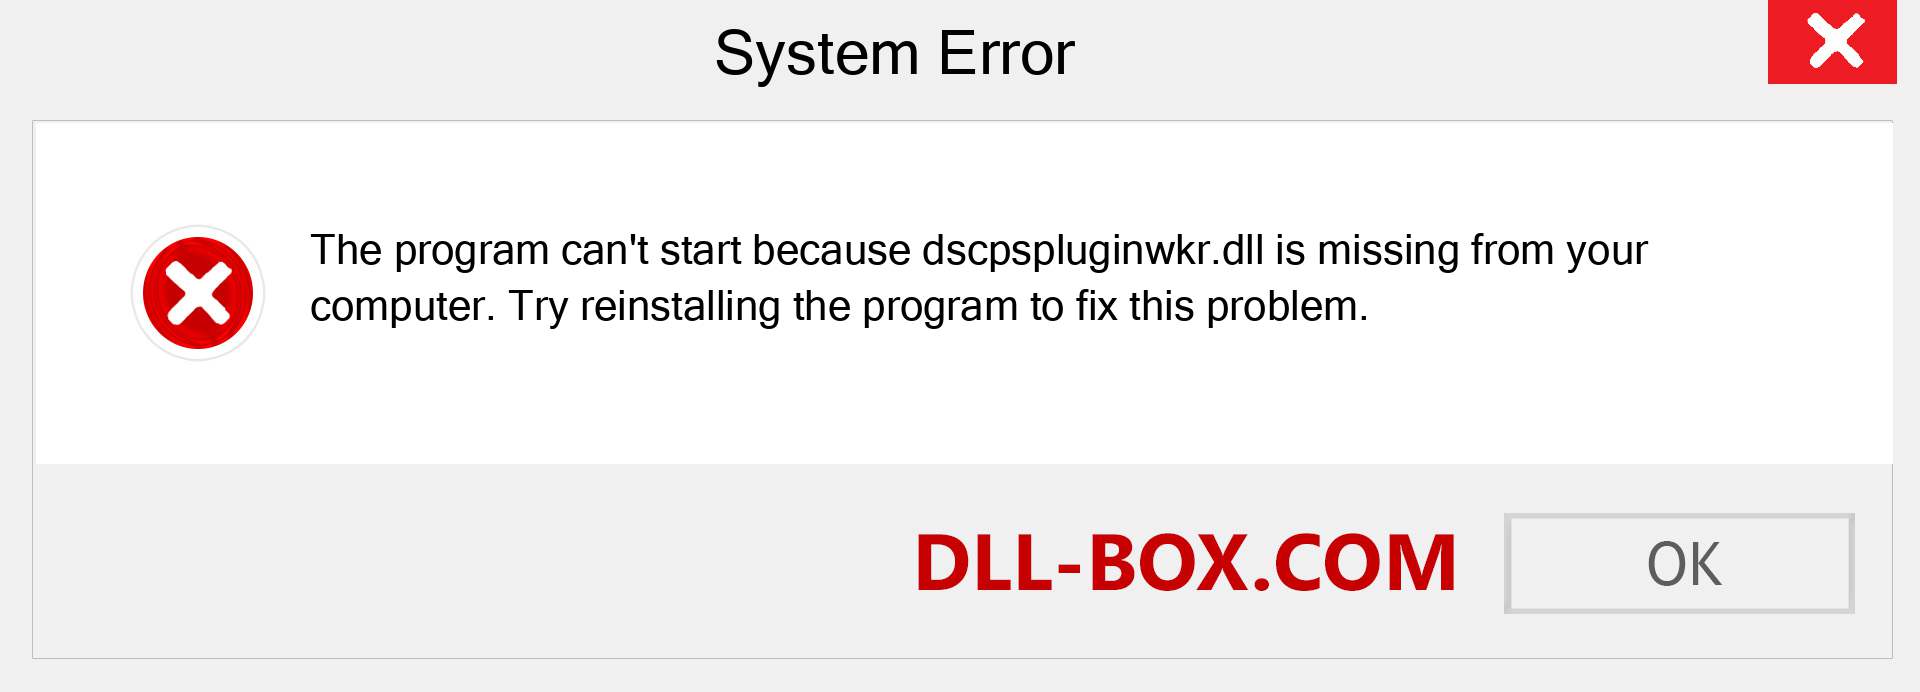  dscpspluginwkr.dll file is missing?. Download for Windows 7, 8, 10 - Fix  dscpspluginwkr dll Missing Error on Windows, photos, images